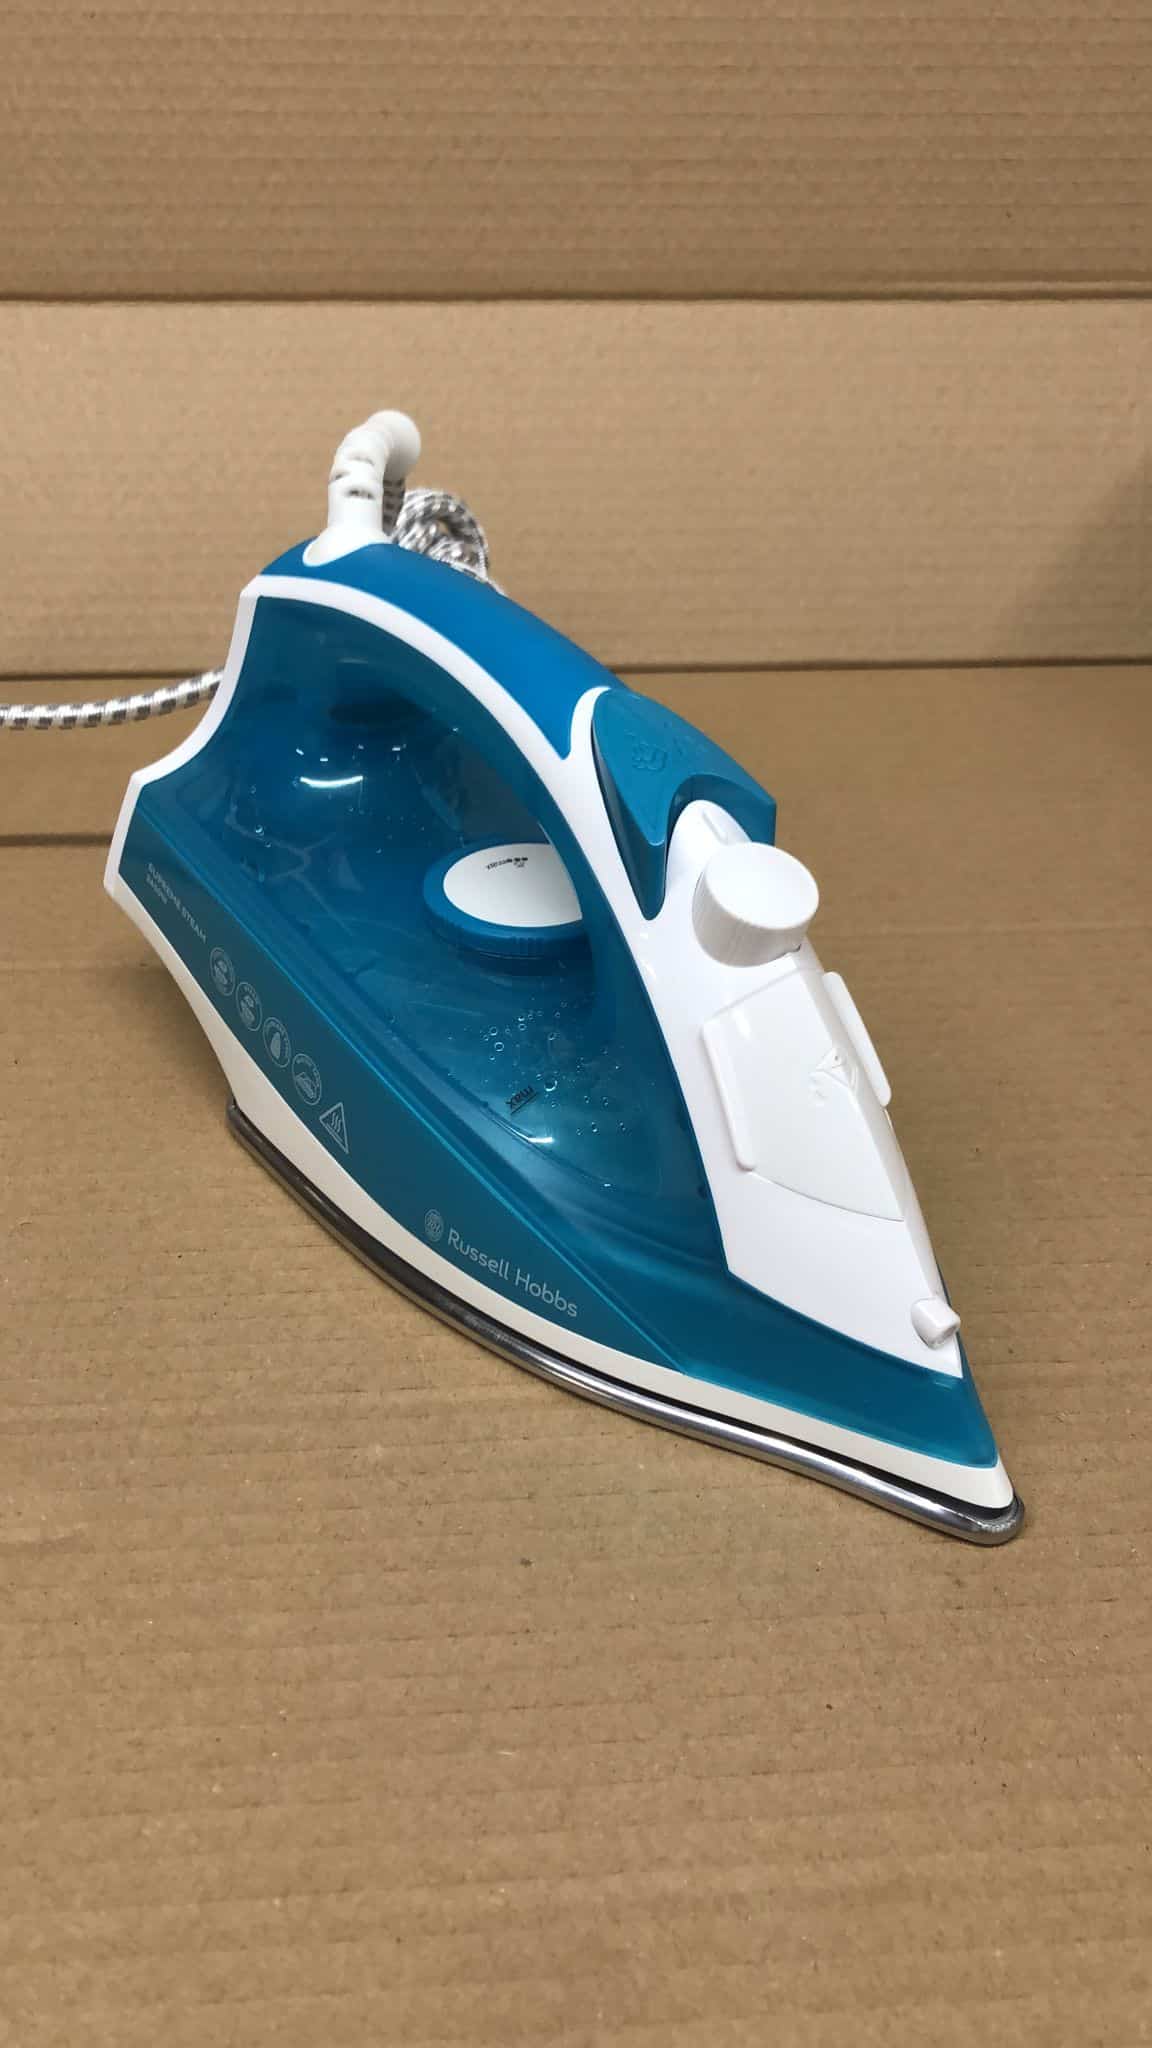 Russell Hobbs 25580 My Iron Steam Iron 1800W, 0.26L Water Tank - Blue and White-0175